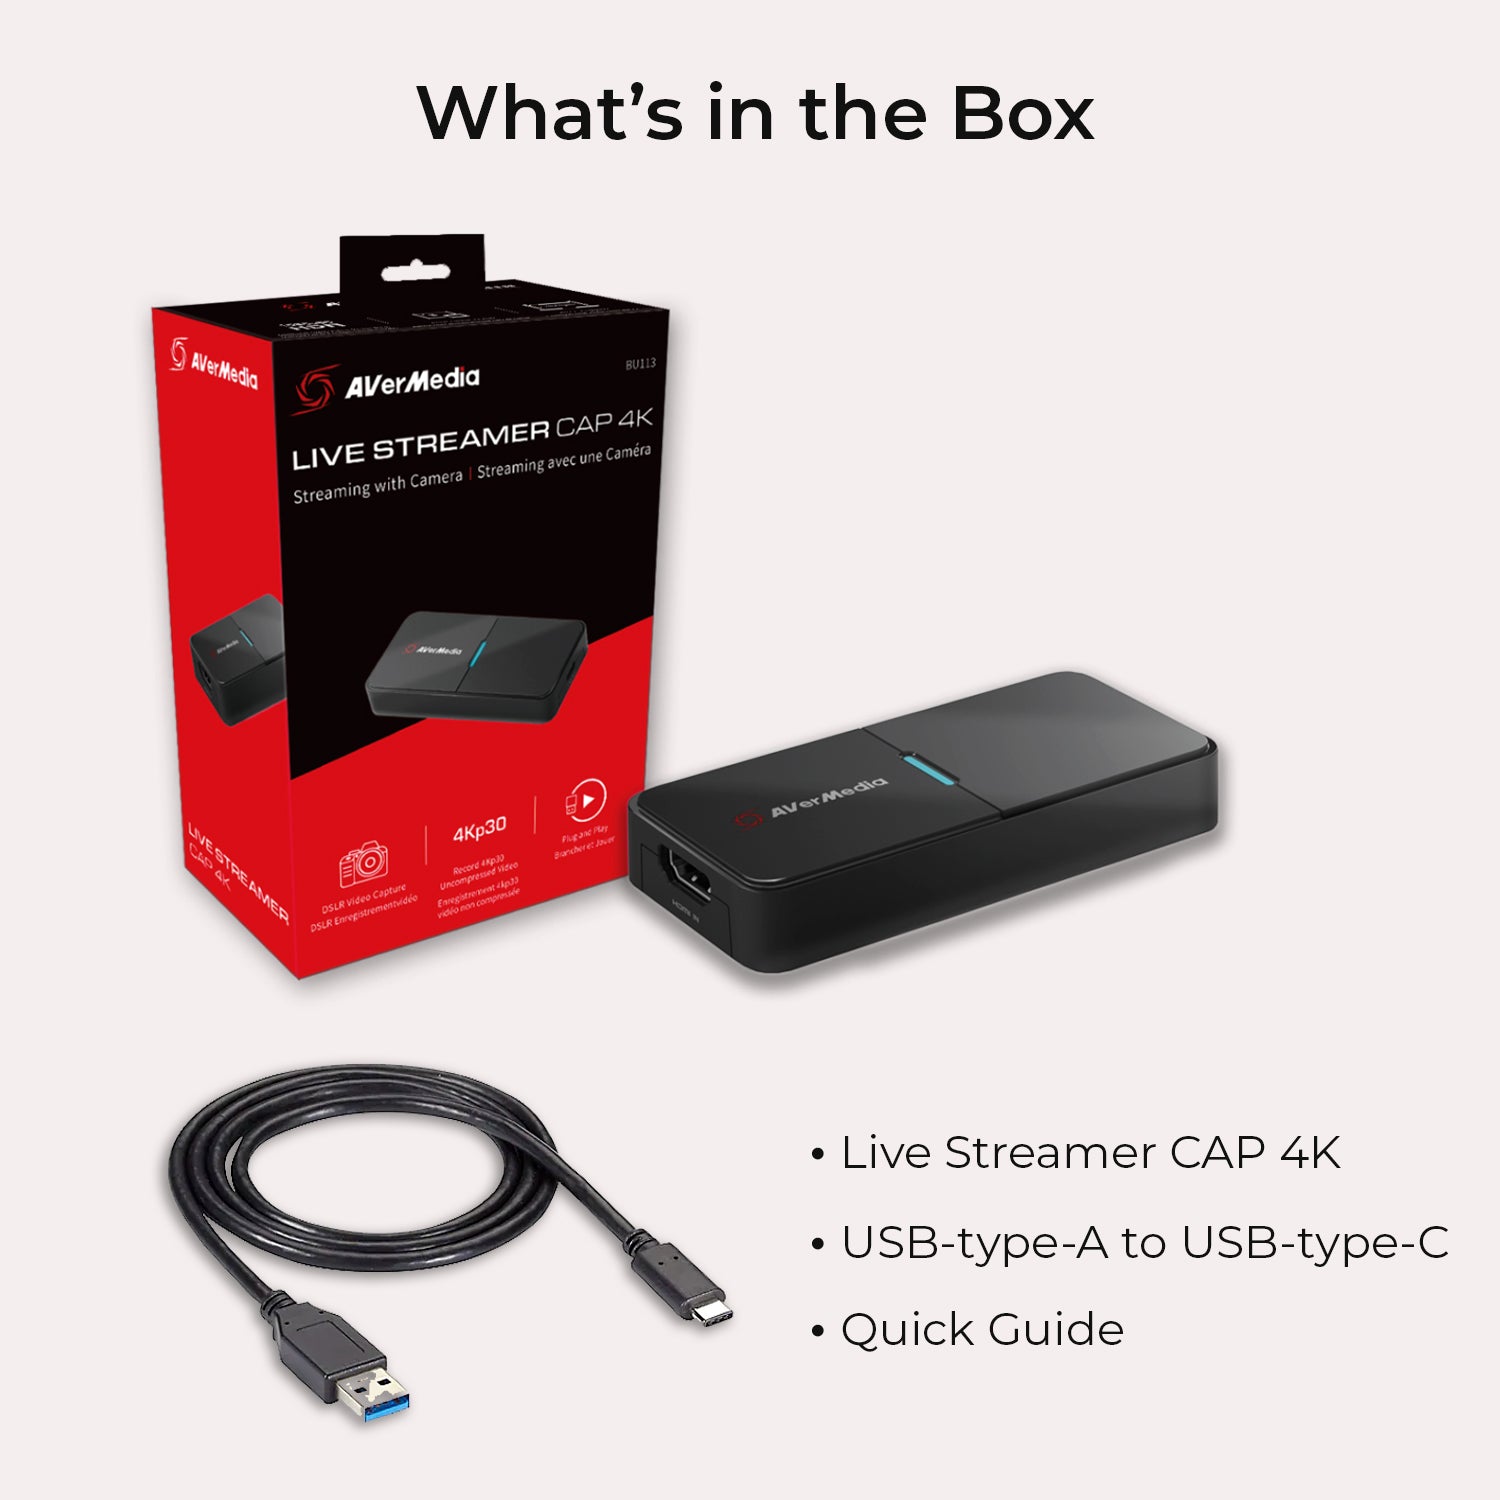 AVerMedia BU113 Capture Card package, items in the box